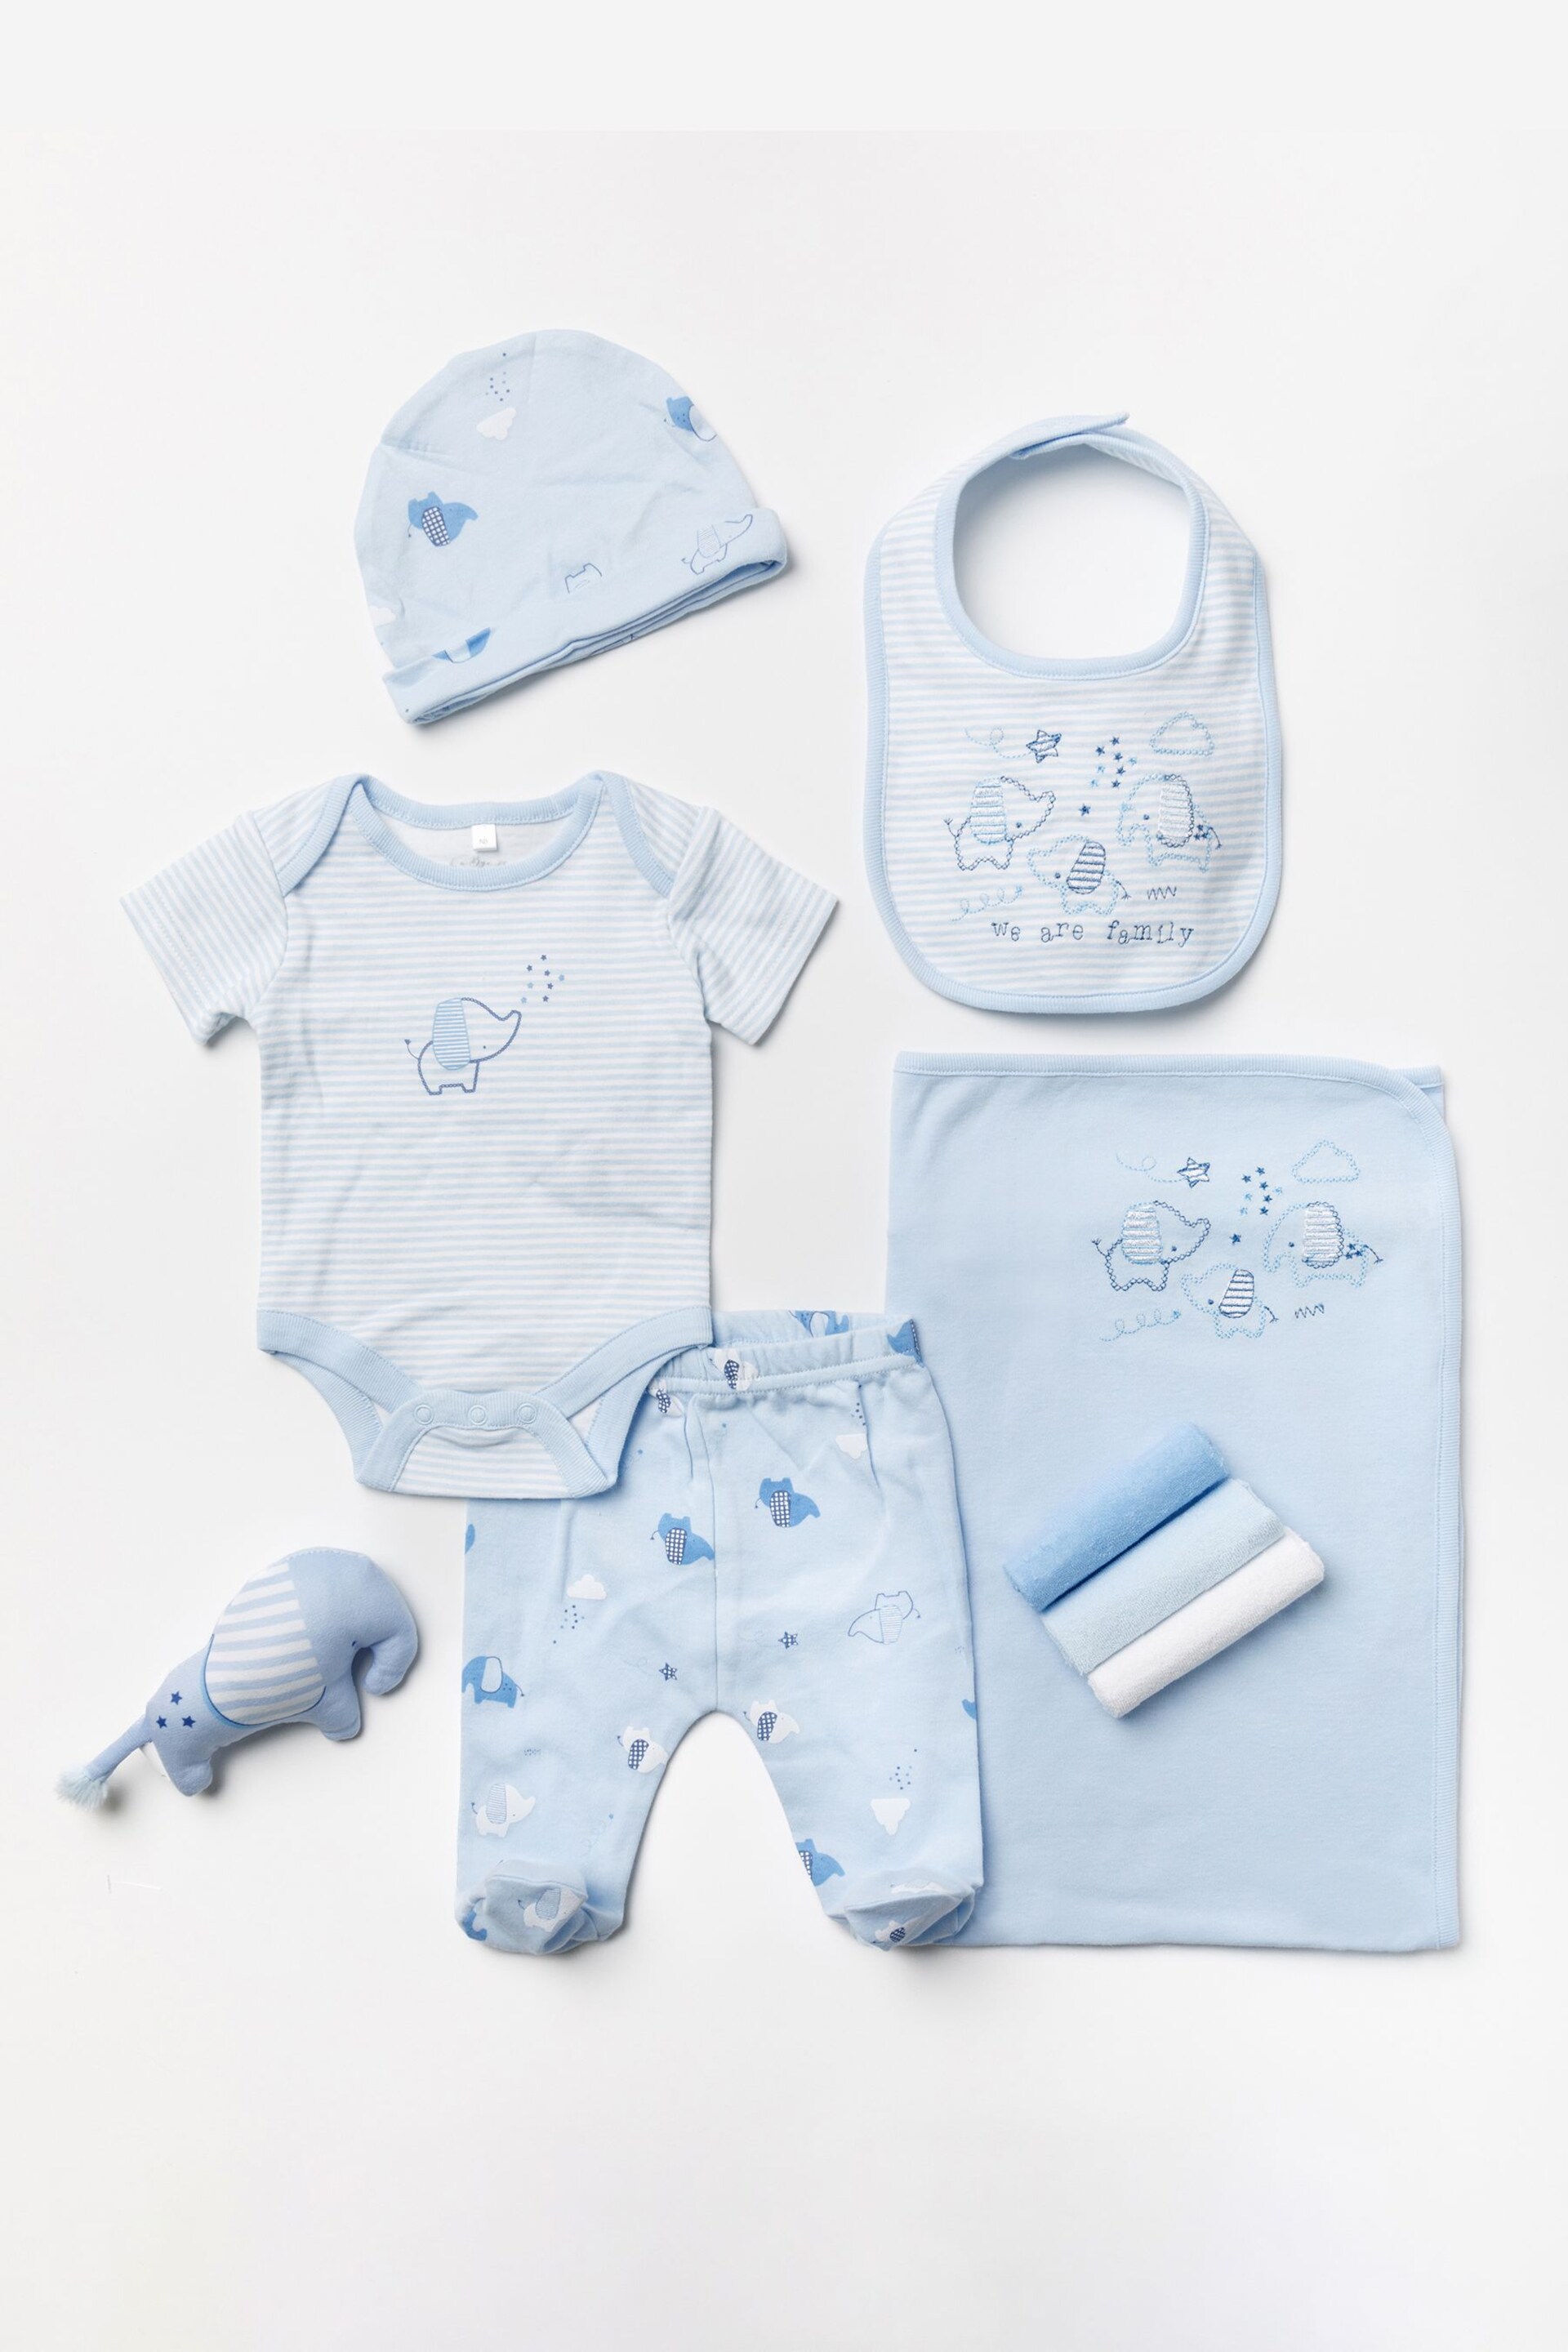 10-Piece Printed Baby Gift Set - Image 1 of 6